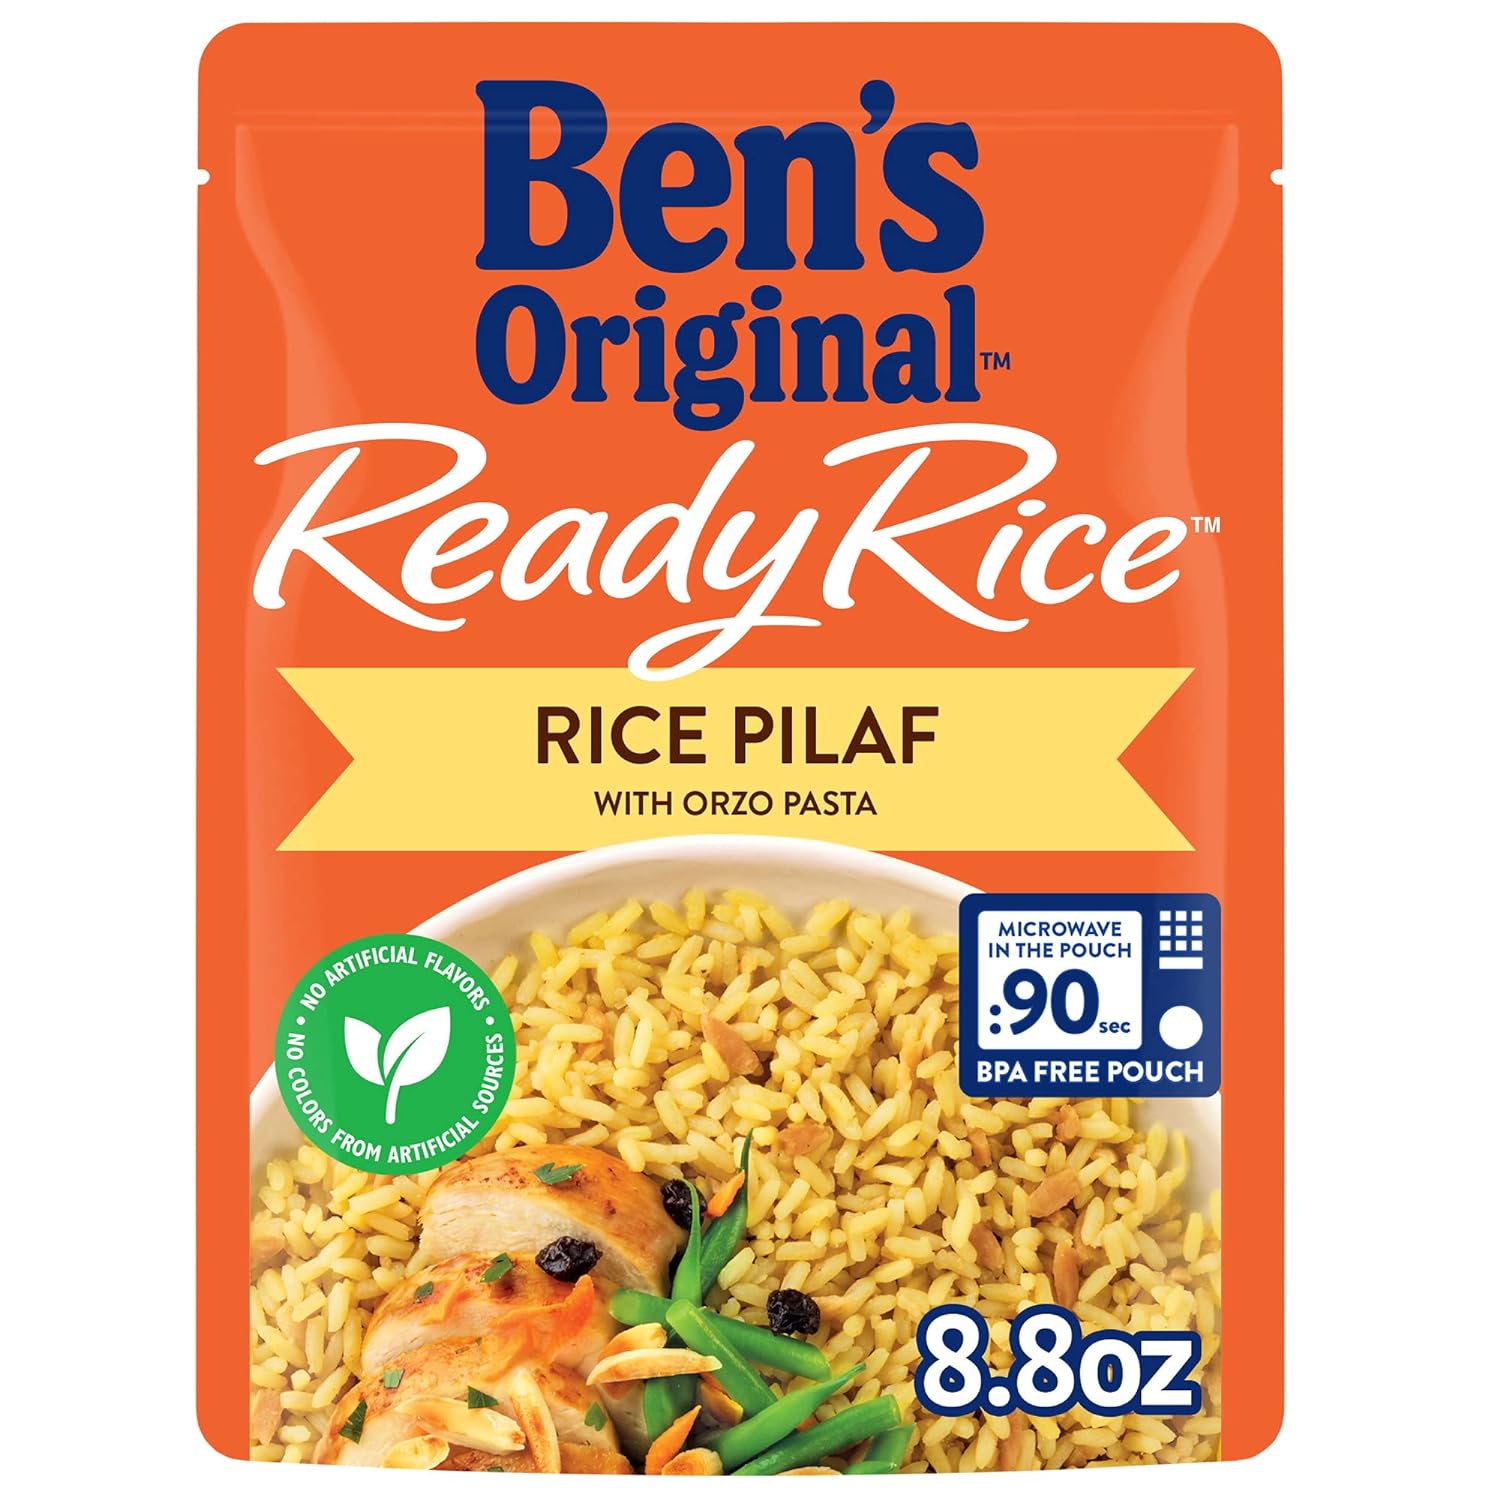 90 seconds in the microwave.  Perfectly proportioned rice to seasonings.  Easy, no mess and rice ready in 90 seconds!